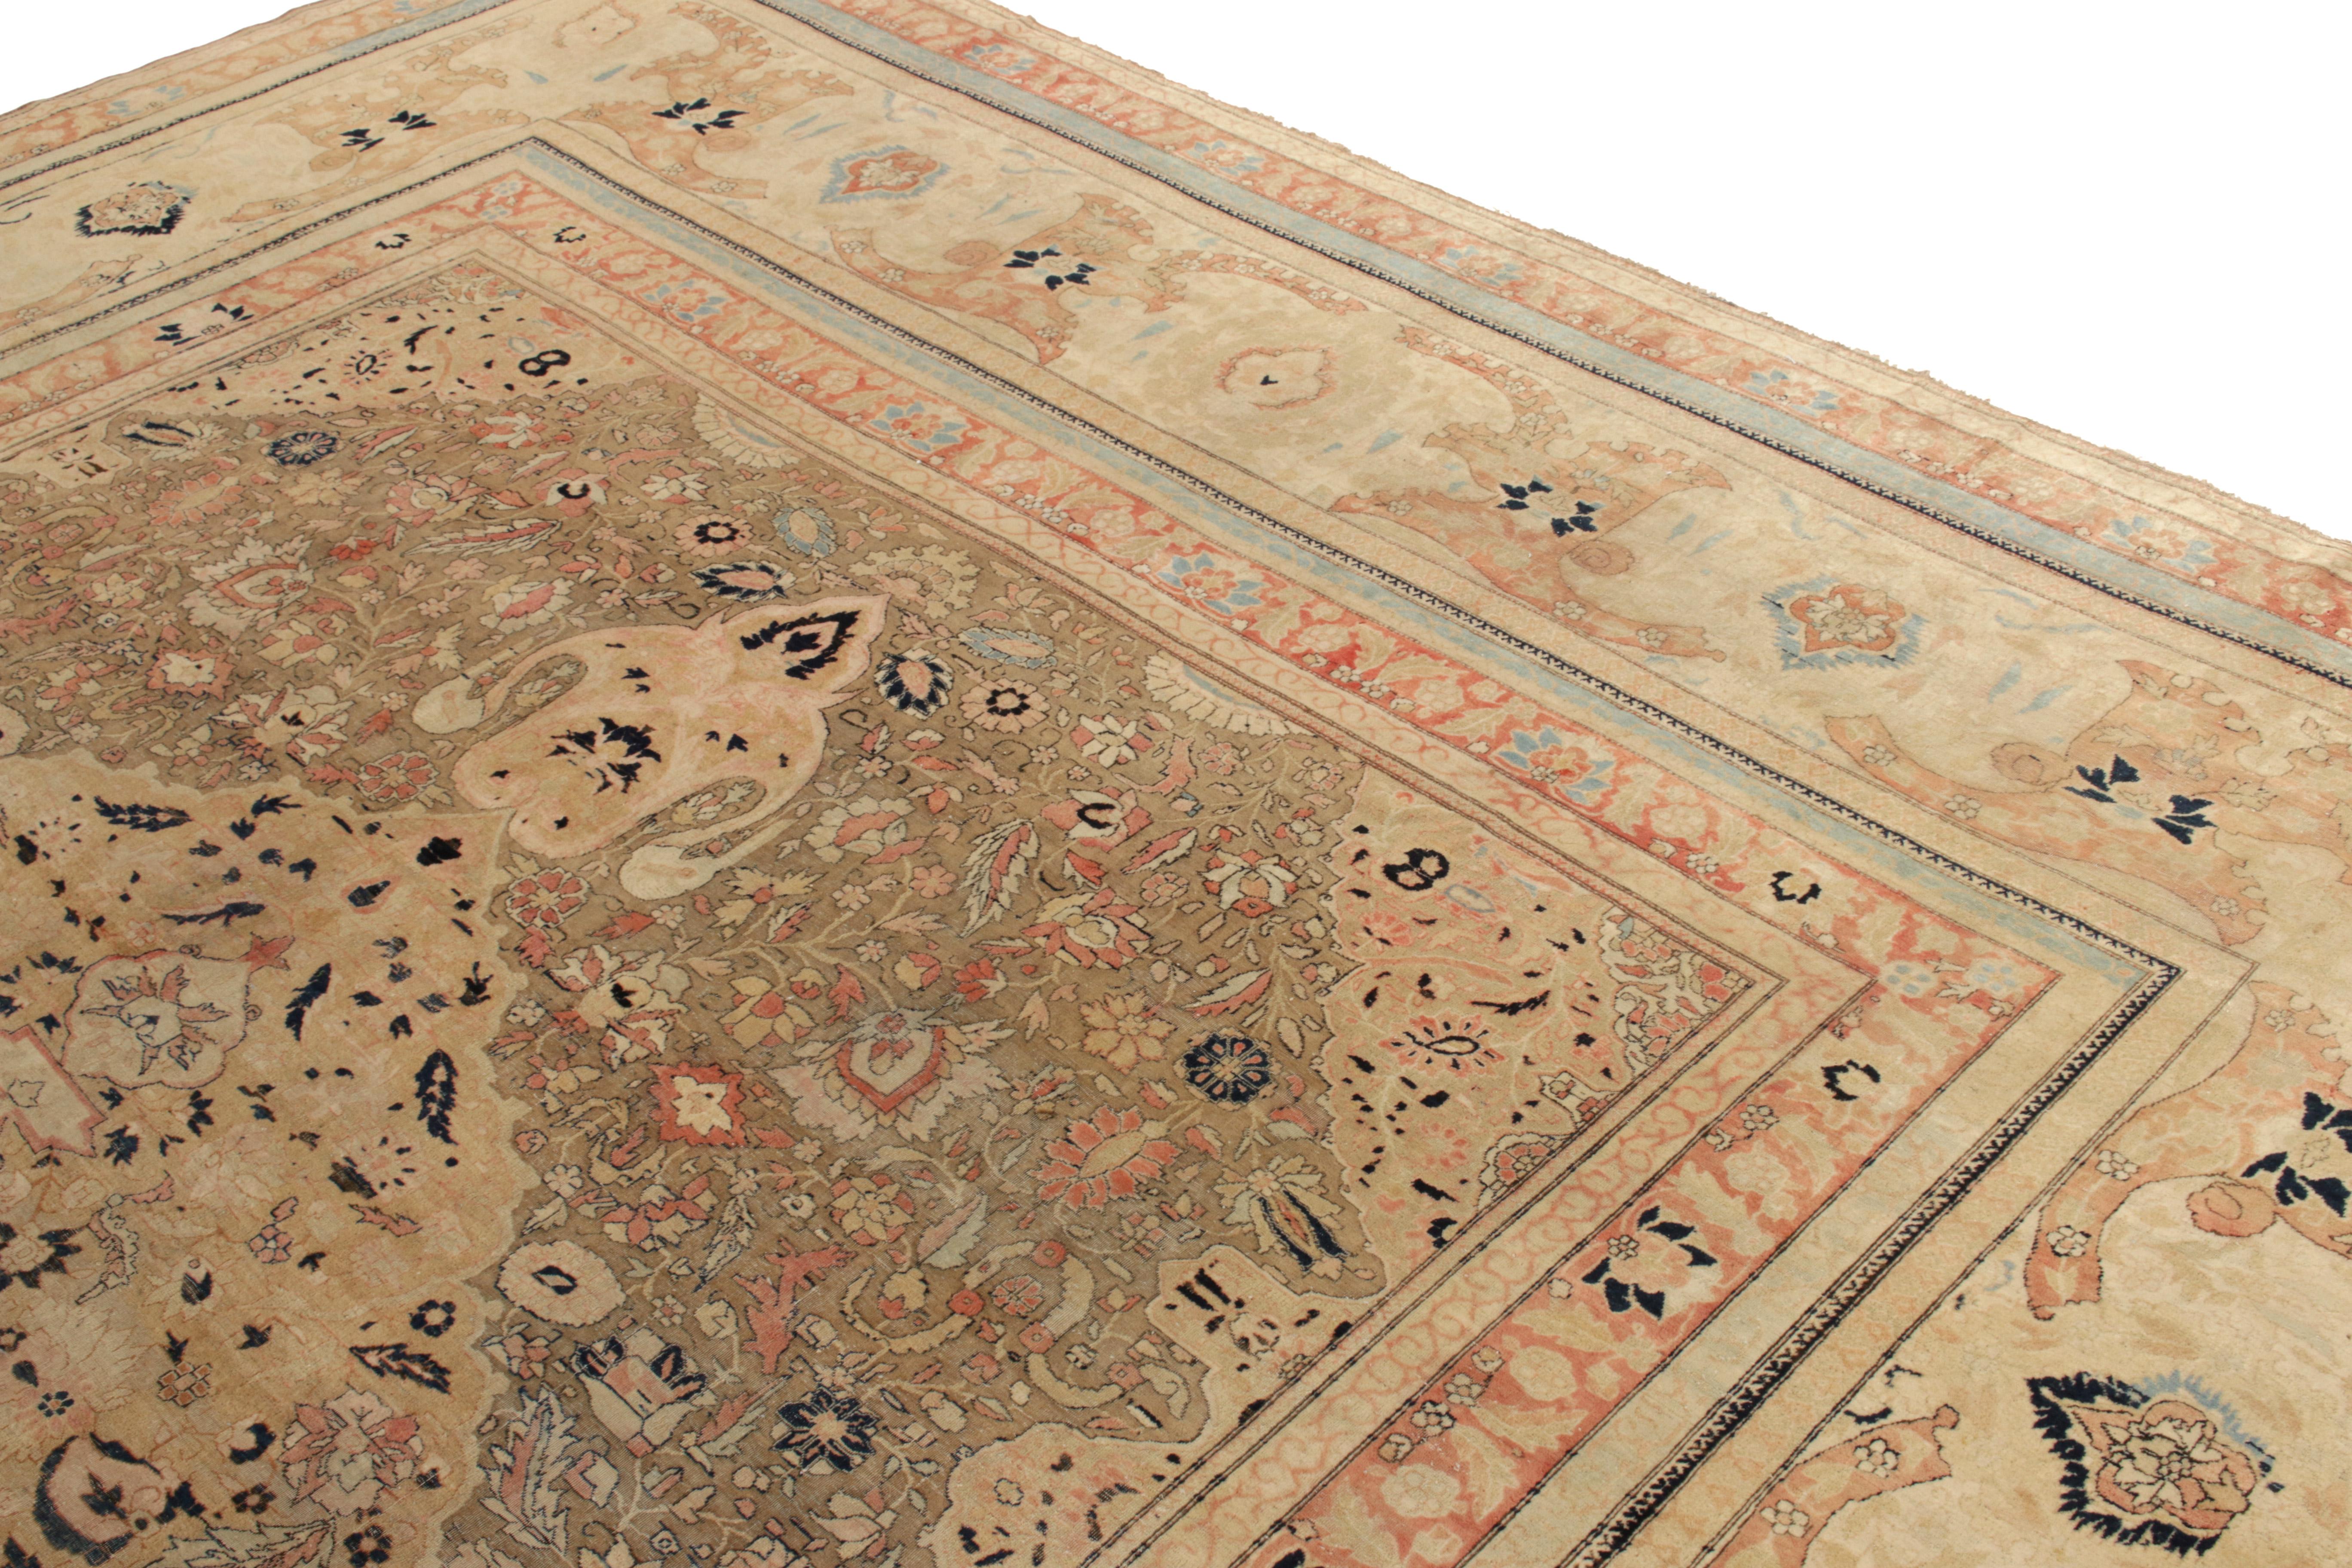 Late 19th Century Hand-Knotted Antique Mohtashem Persian Rug in Beige-Brown, Red Medallion Pattern For Sale